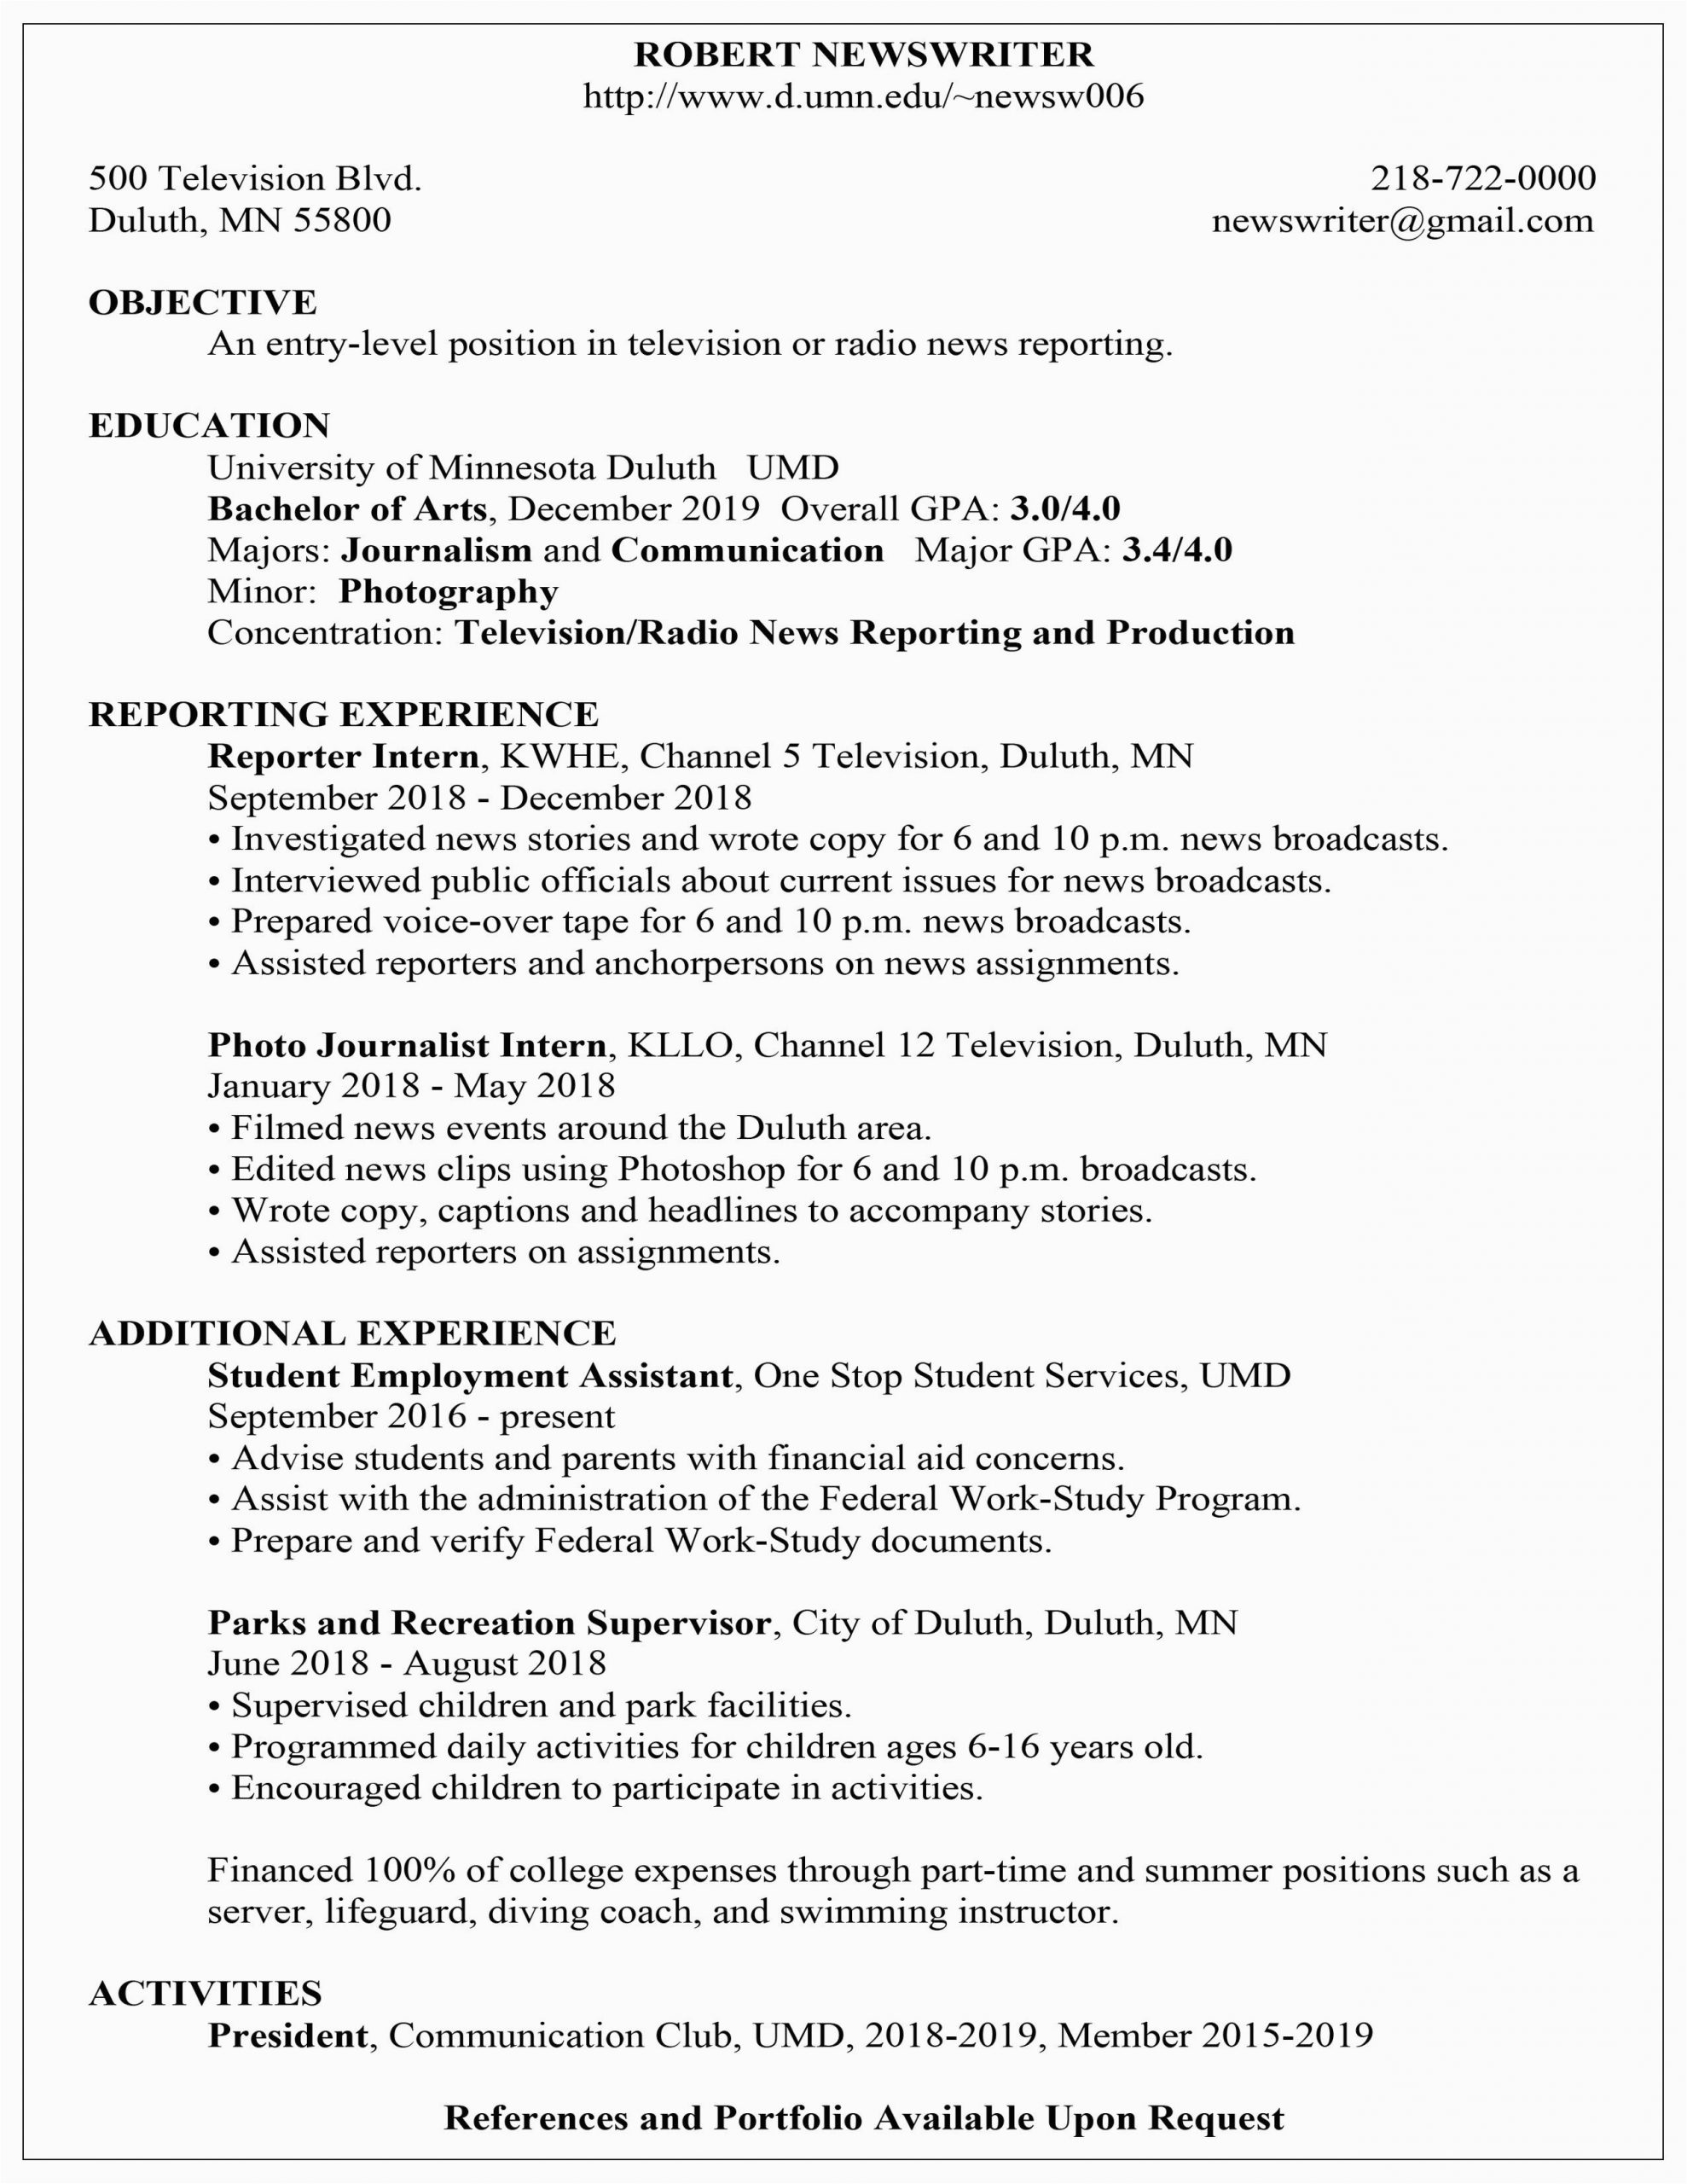 Sample Letter Of Resume to Work Resume Examples Career & Internship Services